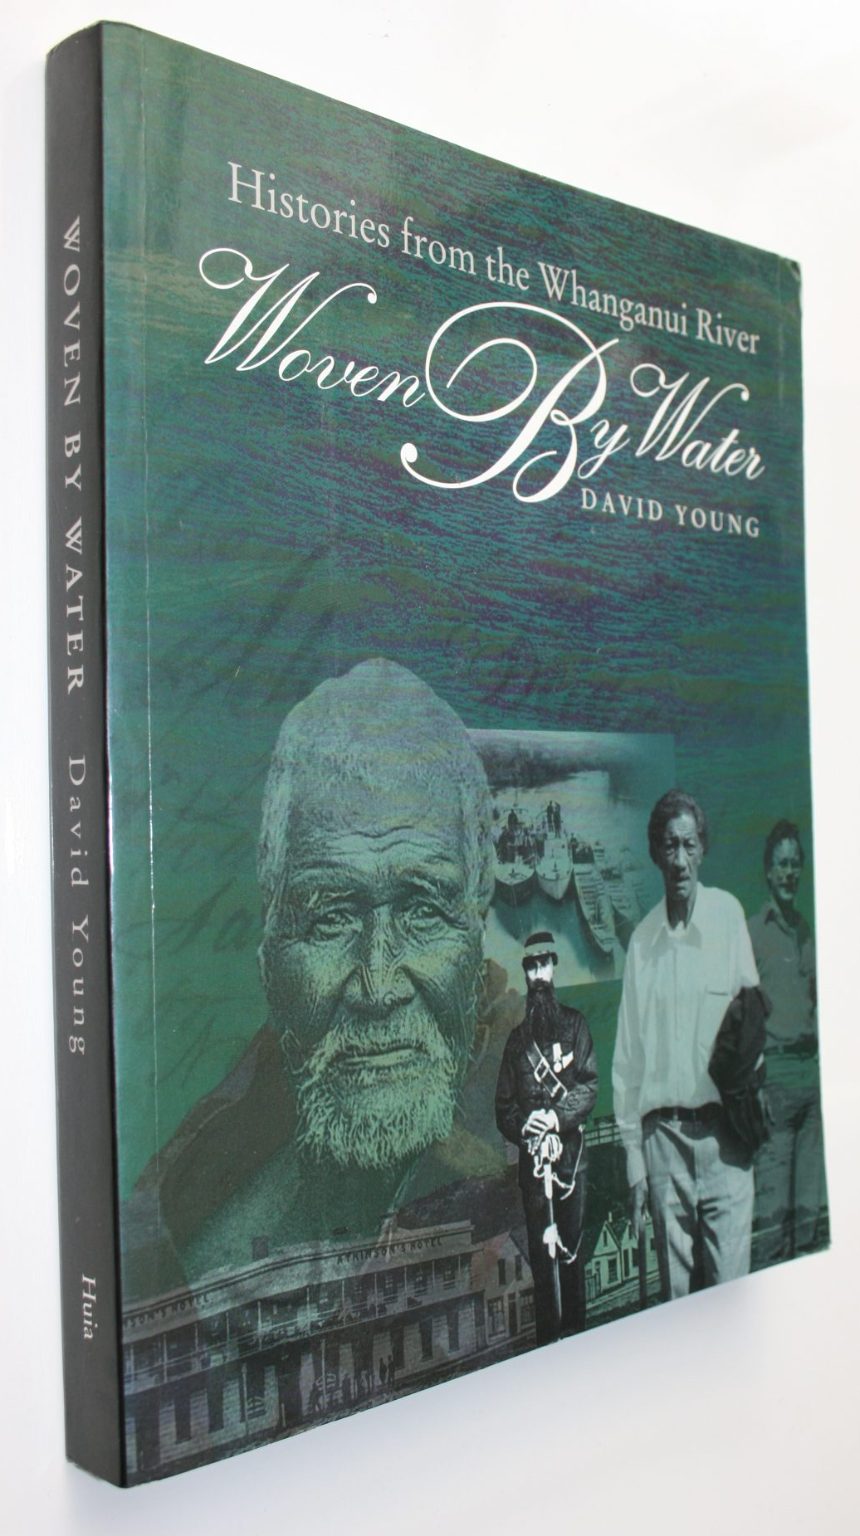 Woven by Water: Histories from the Whanganui River By David Young. VERY SCARCE.